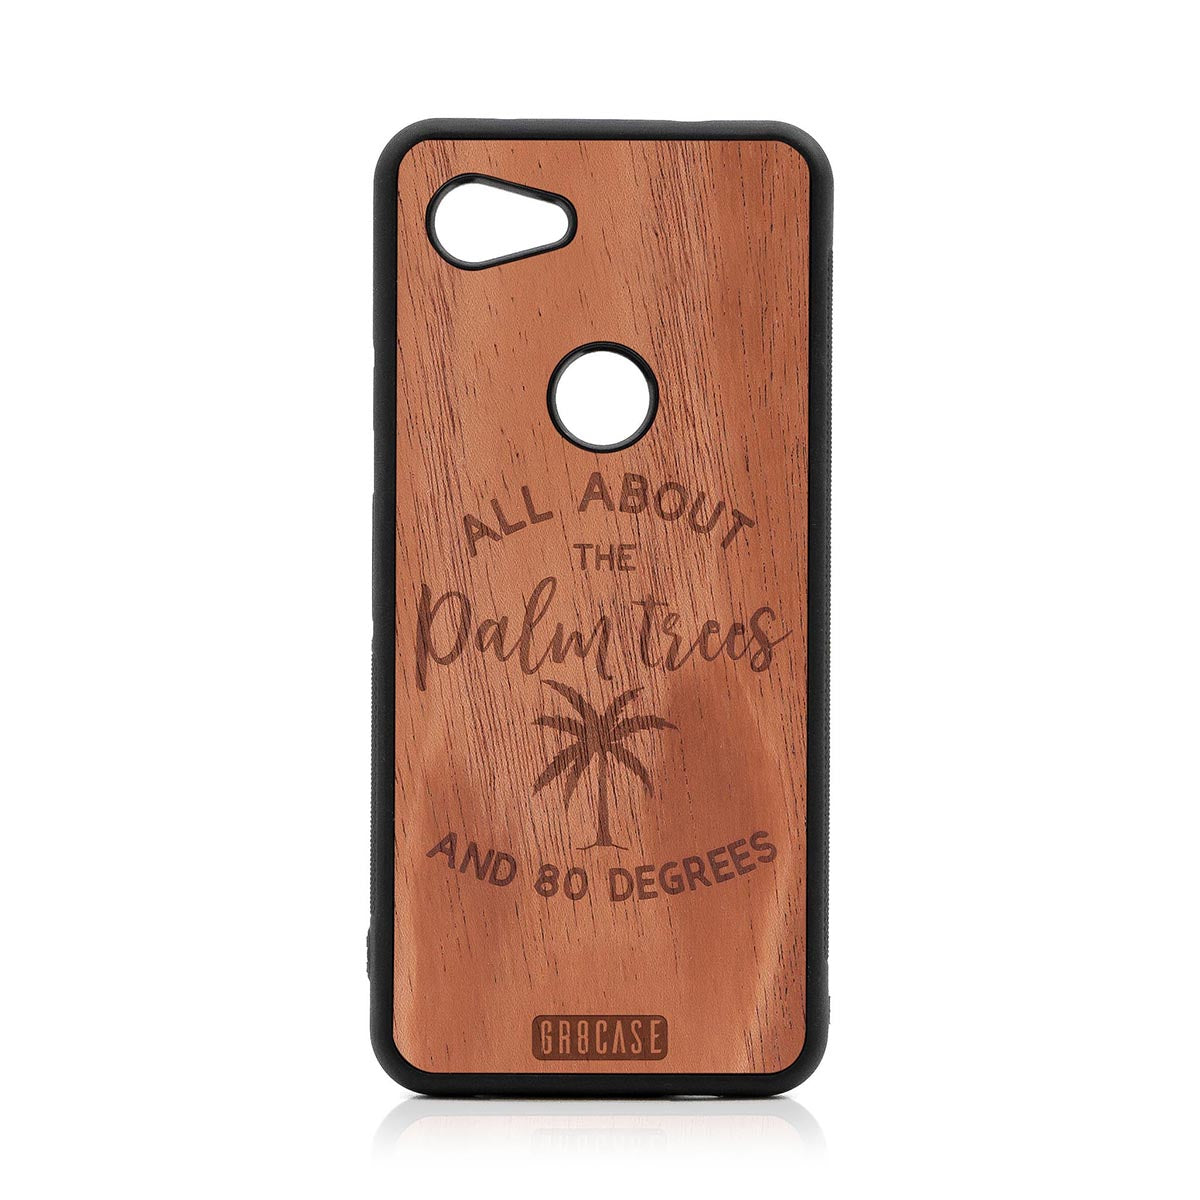 All About The Palm Trees and 80 Degrees Design Wood Case For Google Pixel 3A XL by GR8CASE